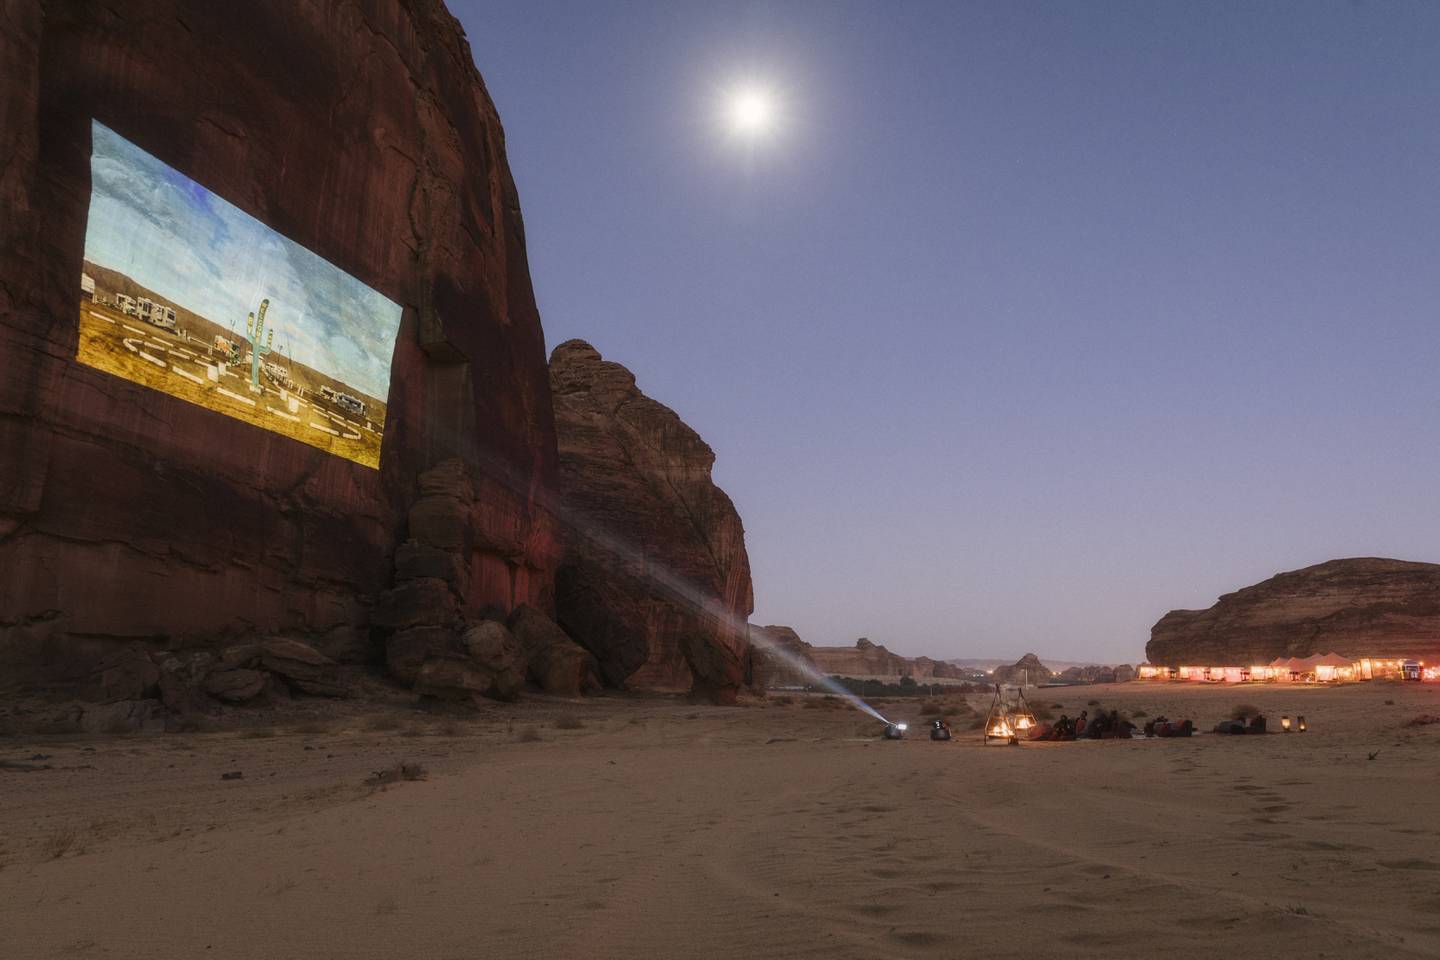 Outdoor cinema sessions at Caravan AlUla will see films projected on to the kingdom's ancient rocks. Photo: Habitas